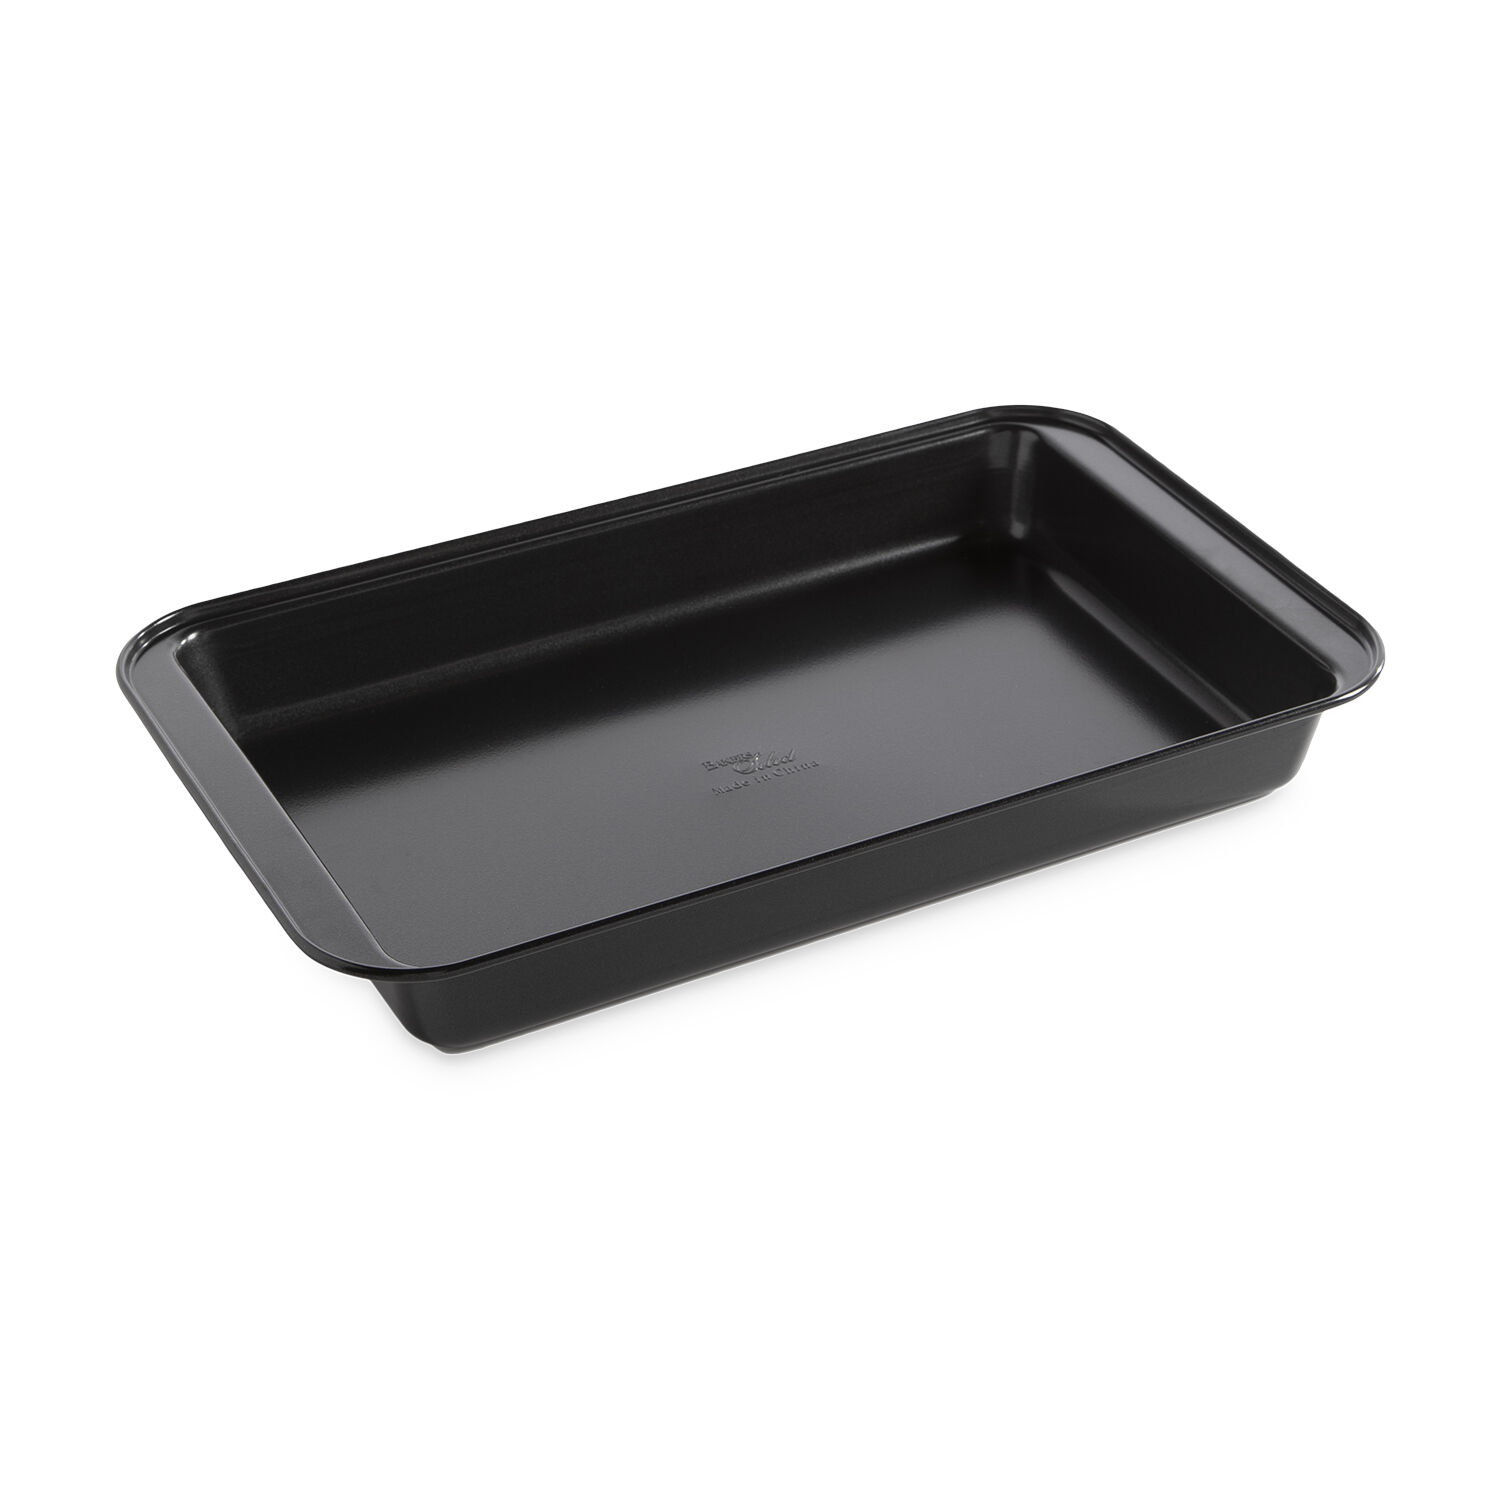 Bakers Select Biscuit & Brownie Baking Tray 27.5cm - Home Store + More